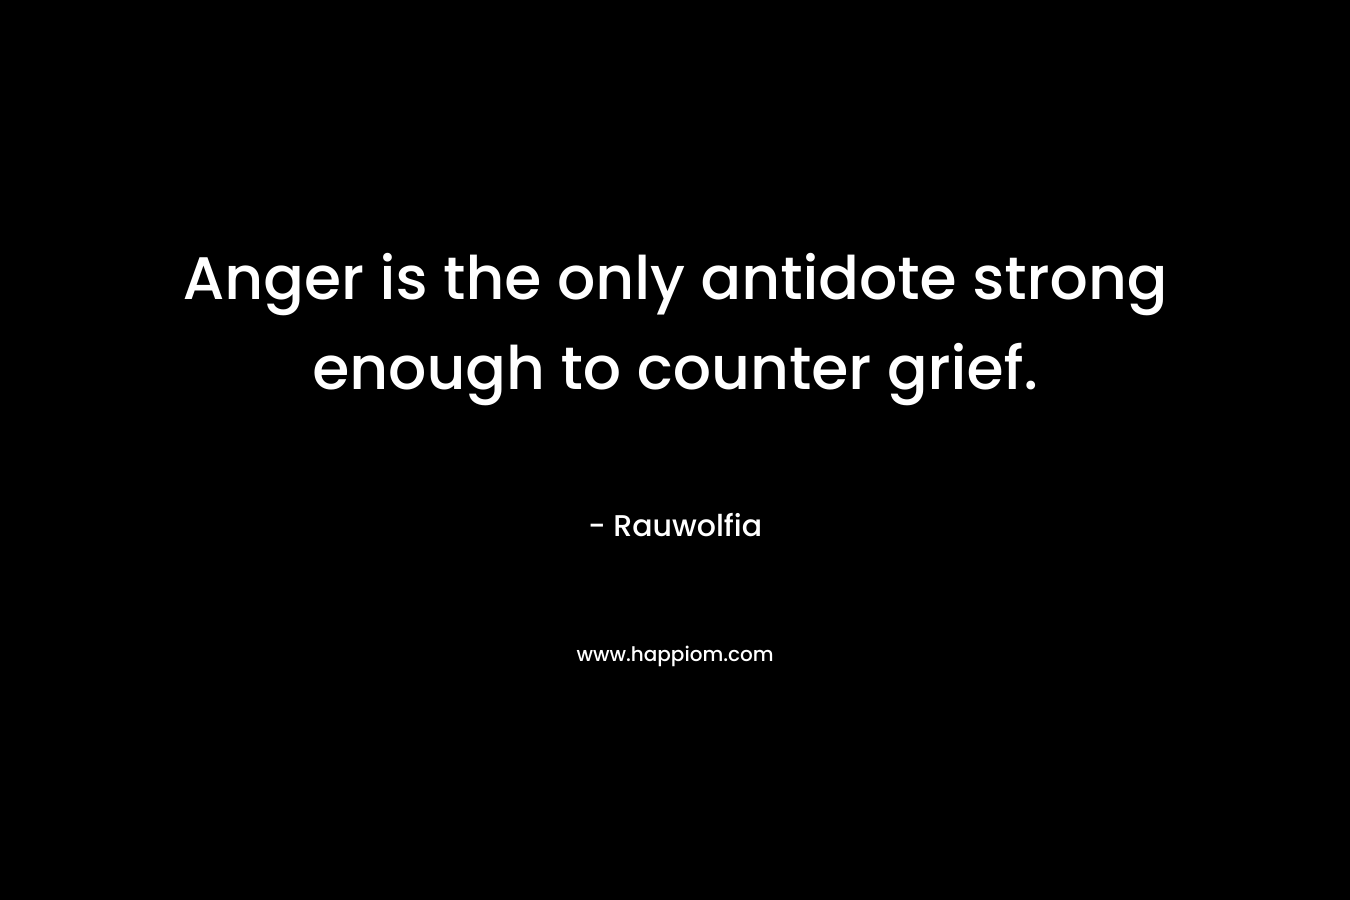 Anger is the only antidote strong enough to counter grief. – Rauwolfia